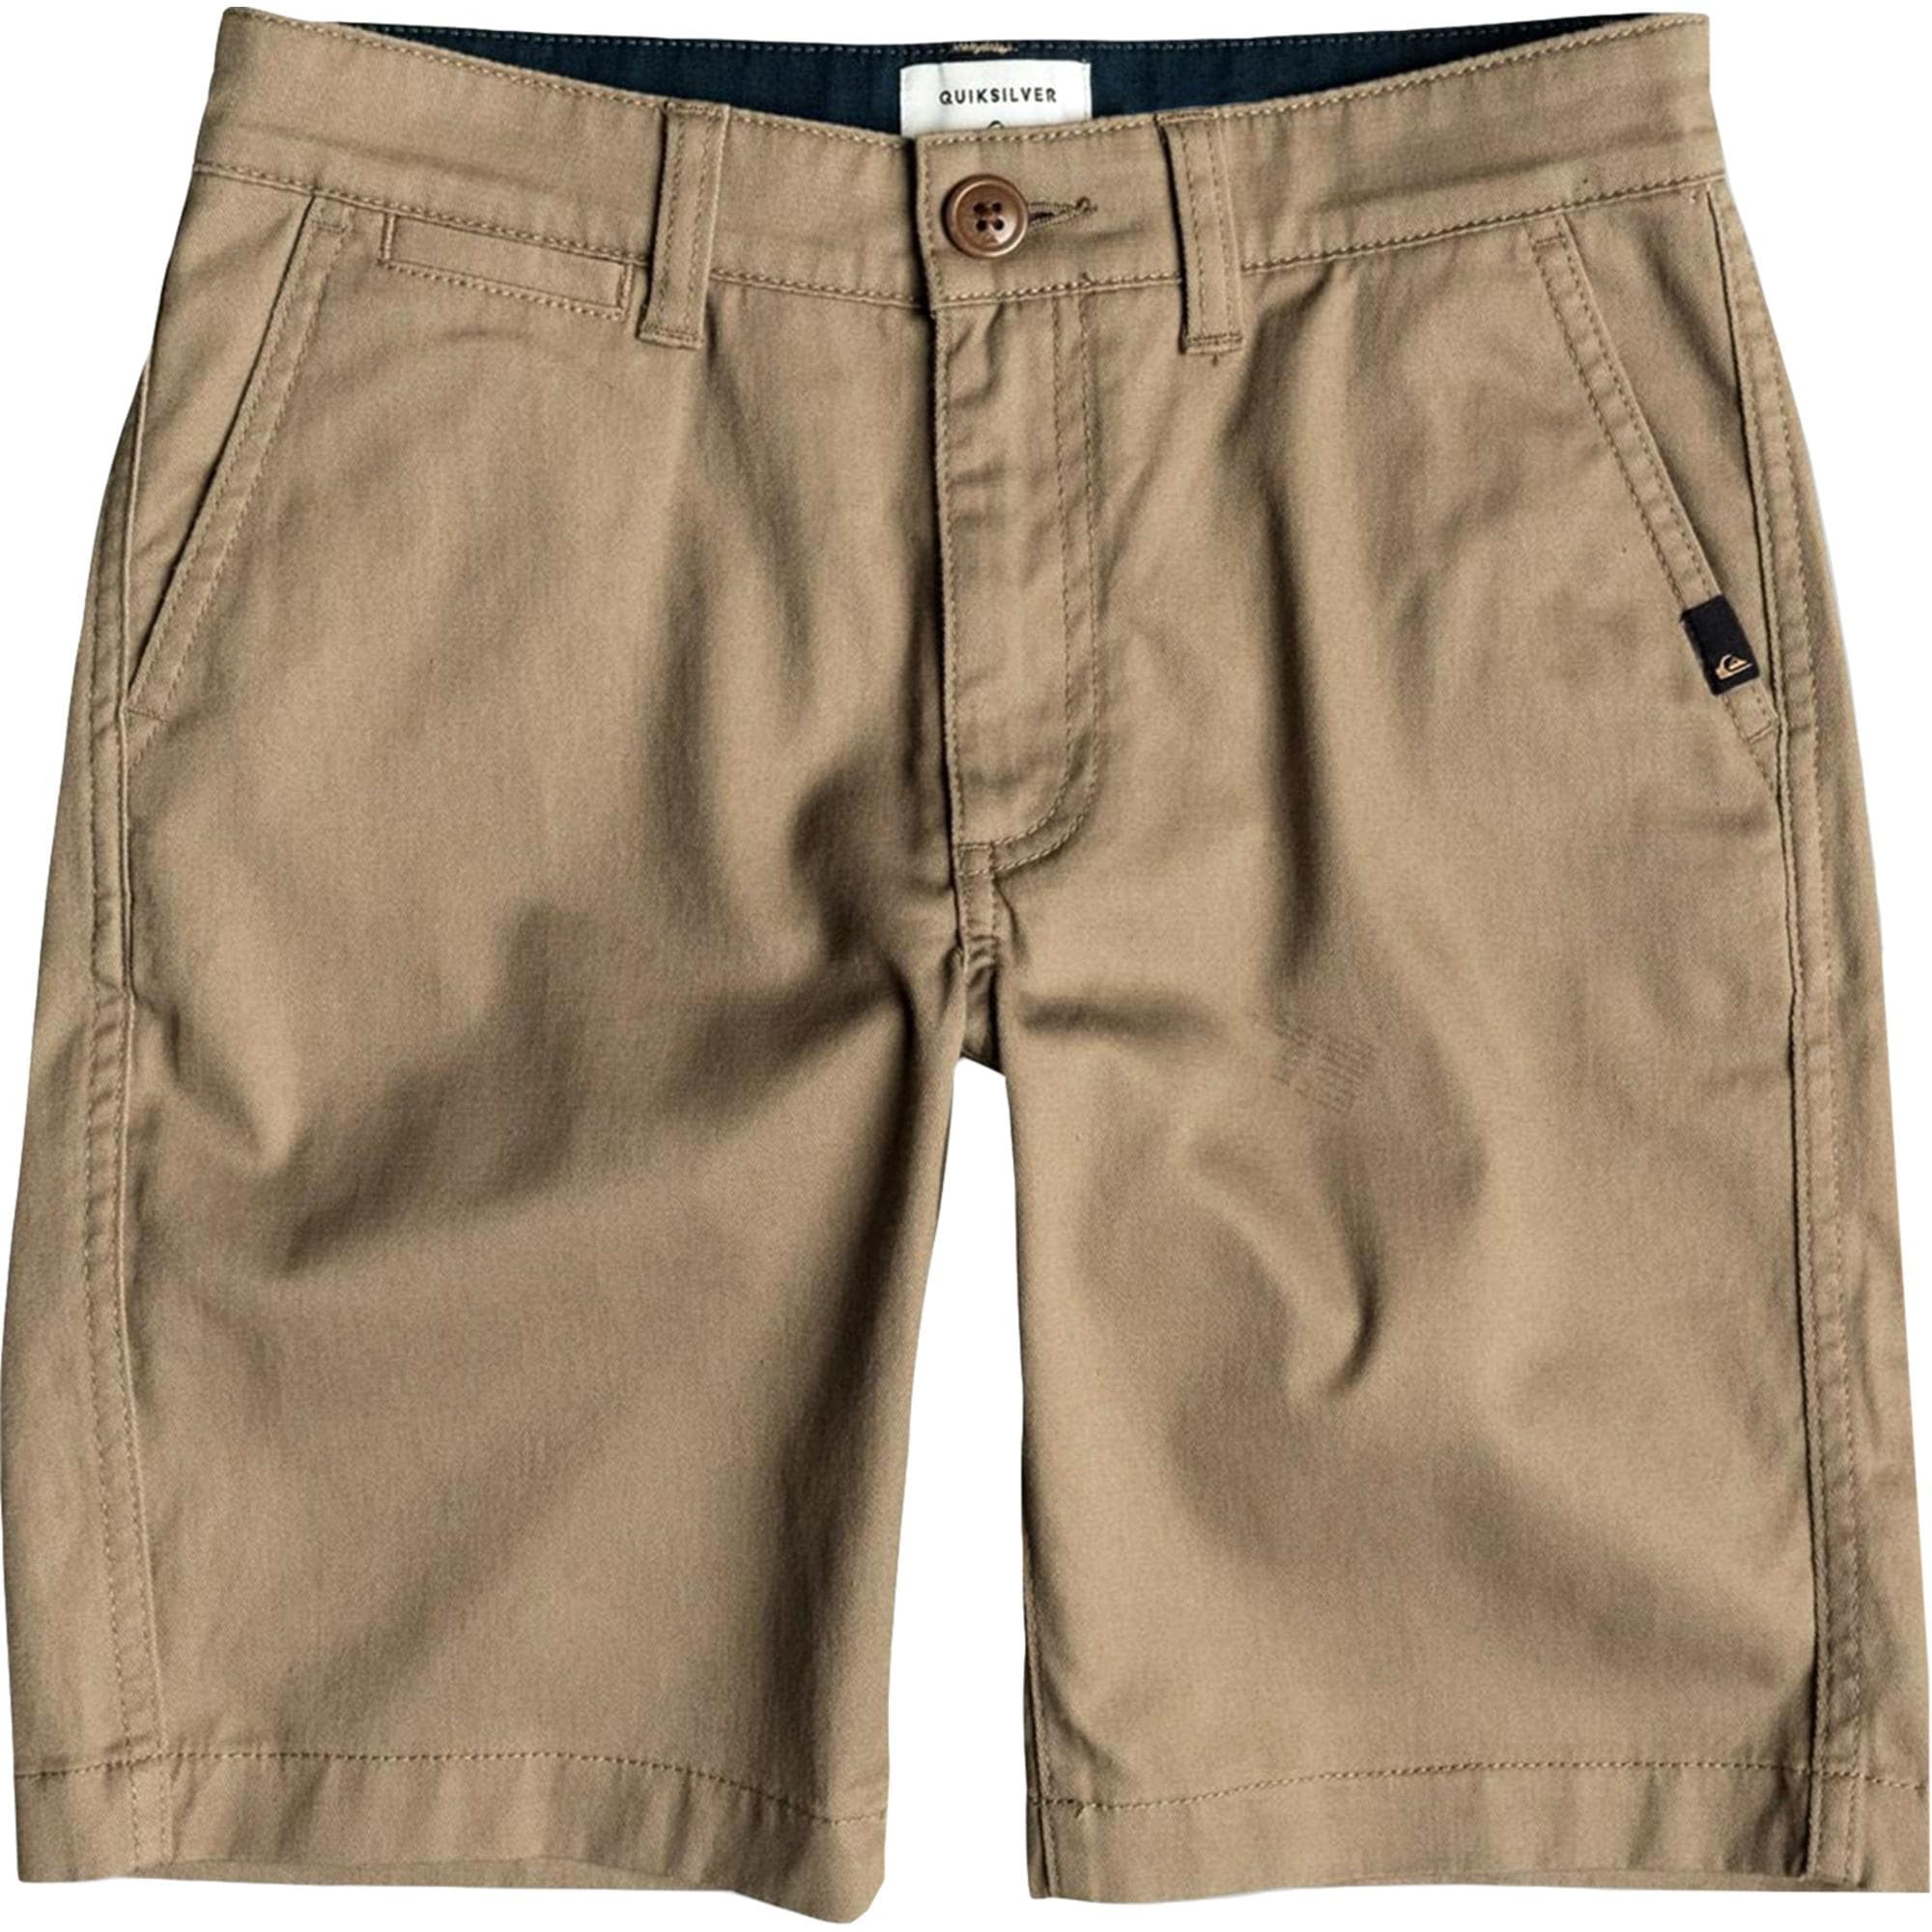 Quiksilver Boys Everyday Union Youth Pants